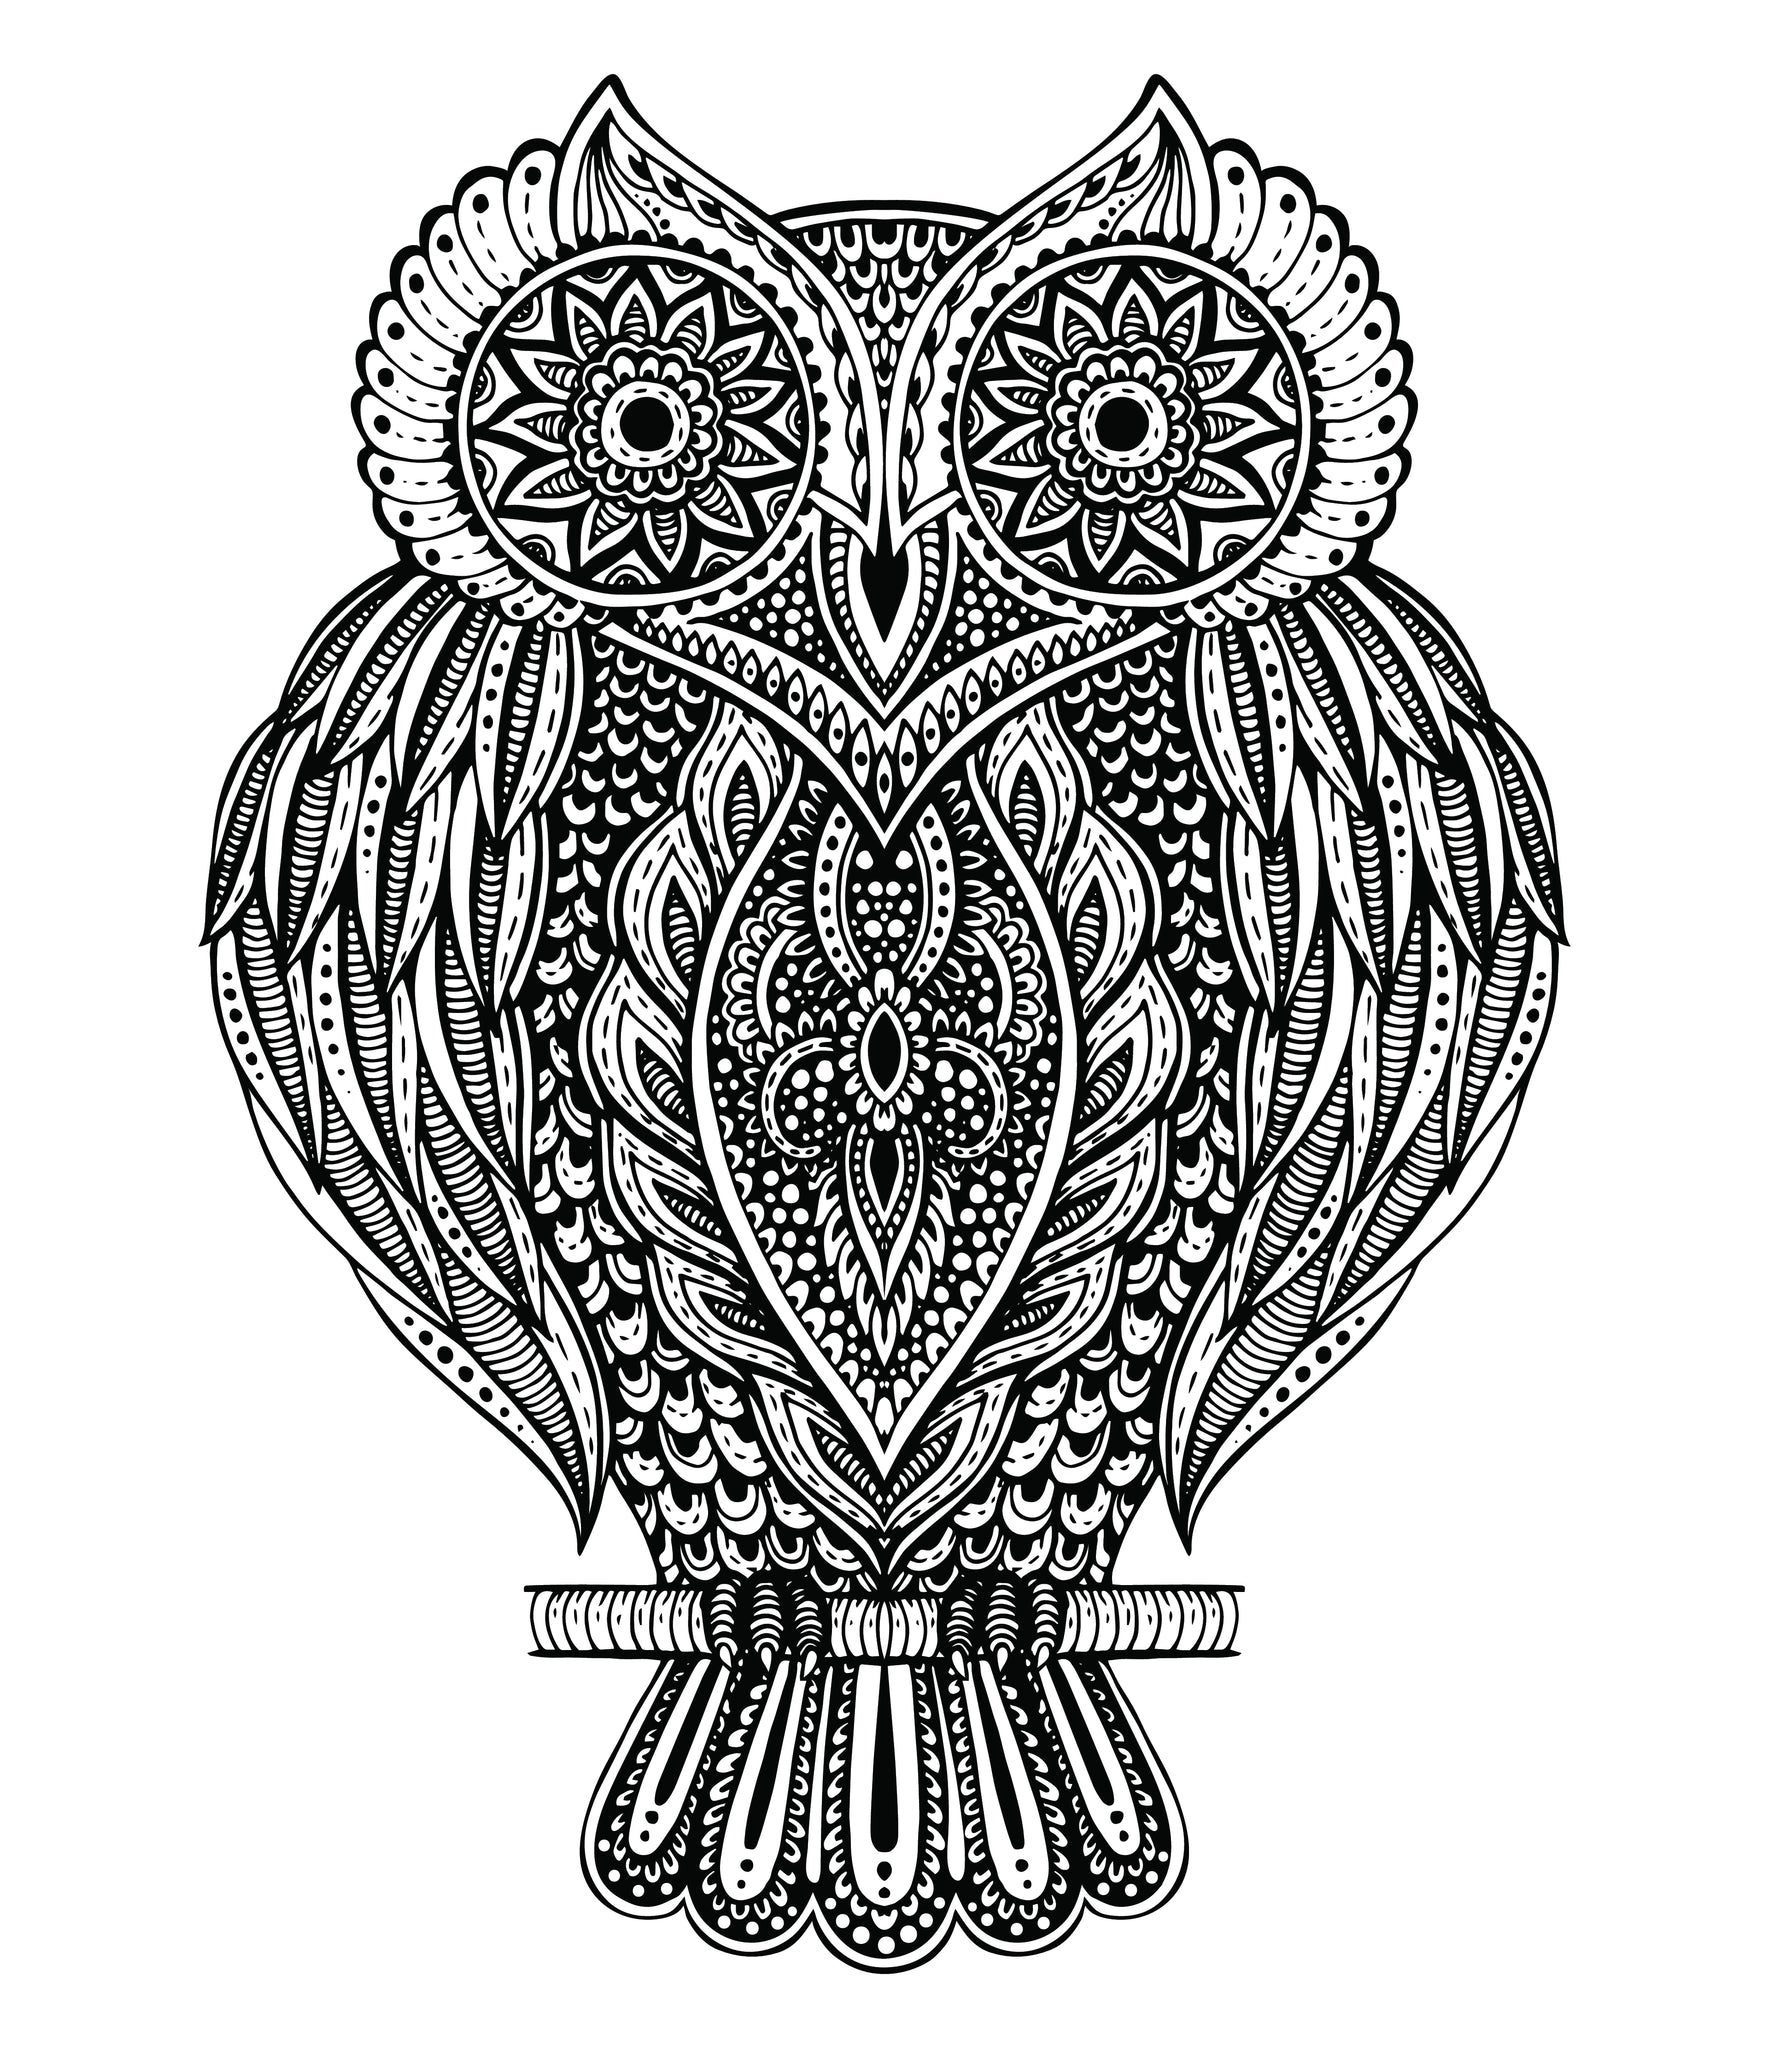 Owl with Tribal Print Feathers Vinyl Decal Sticker